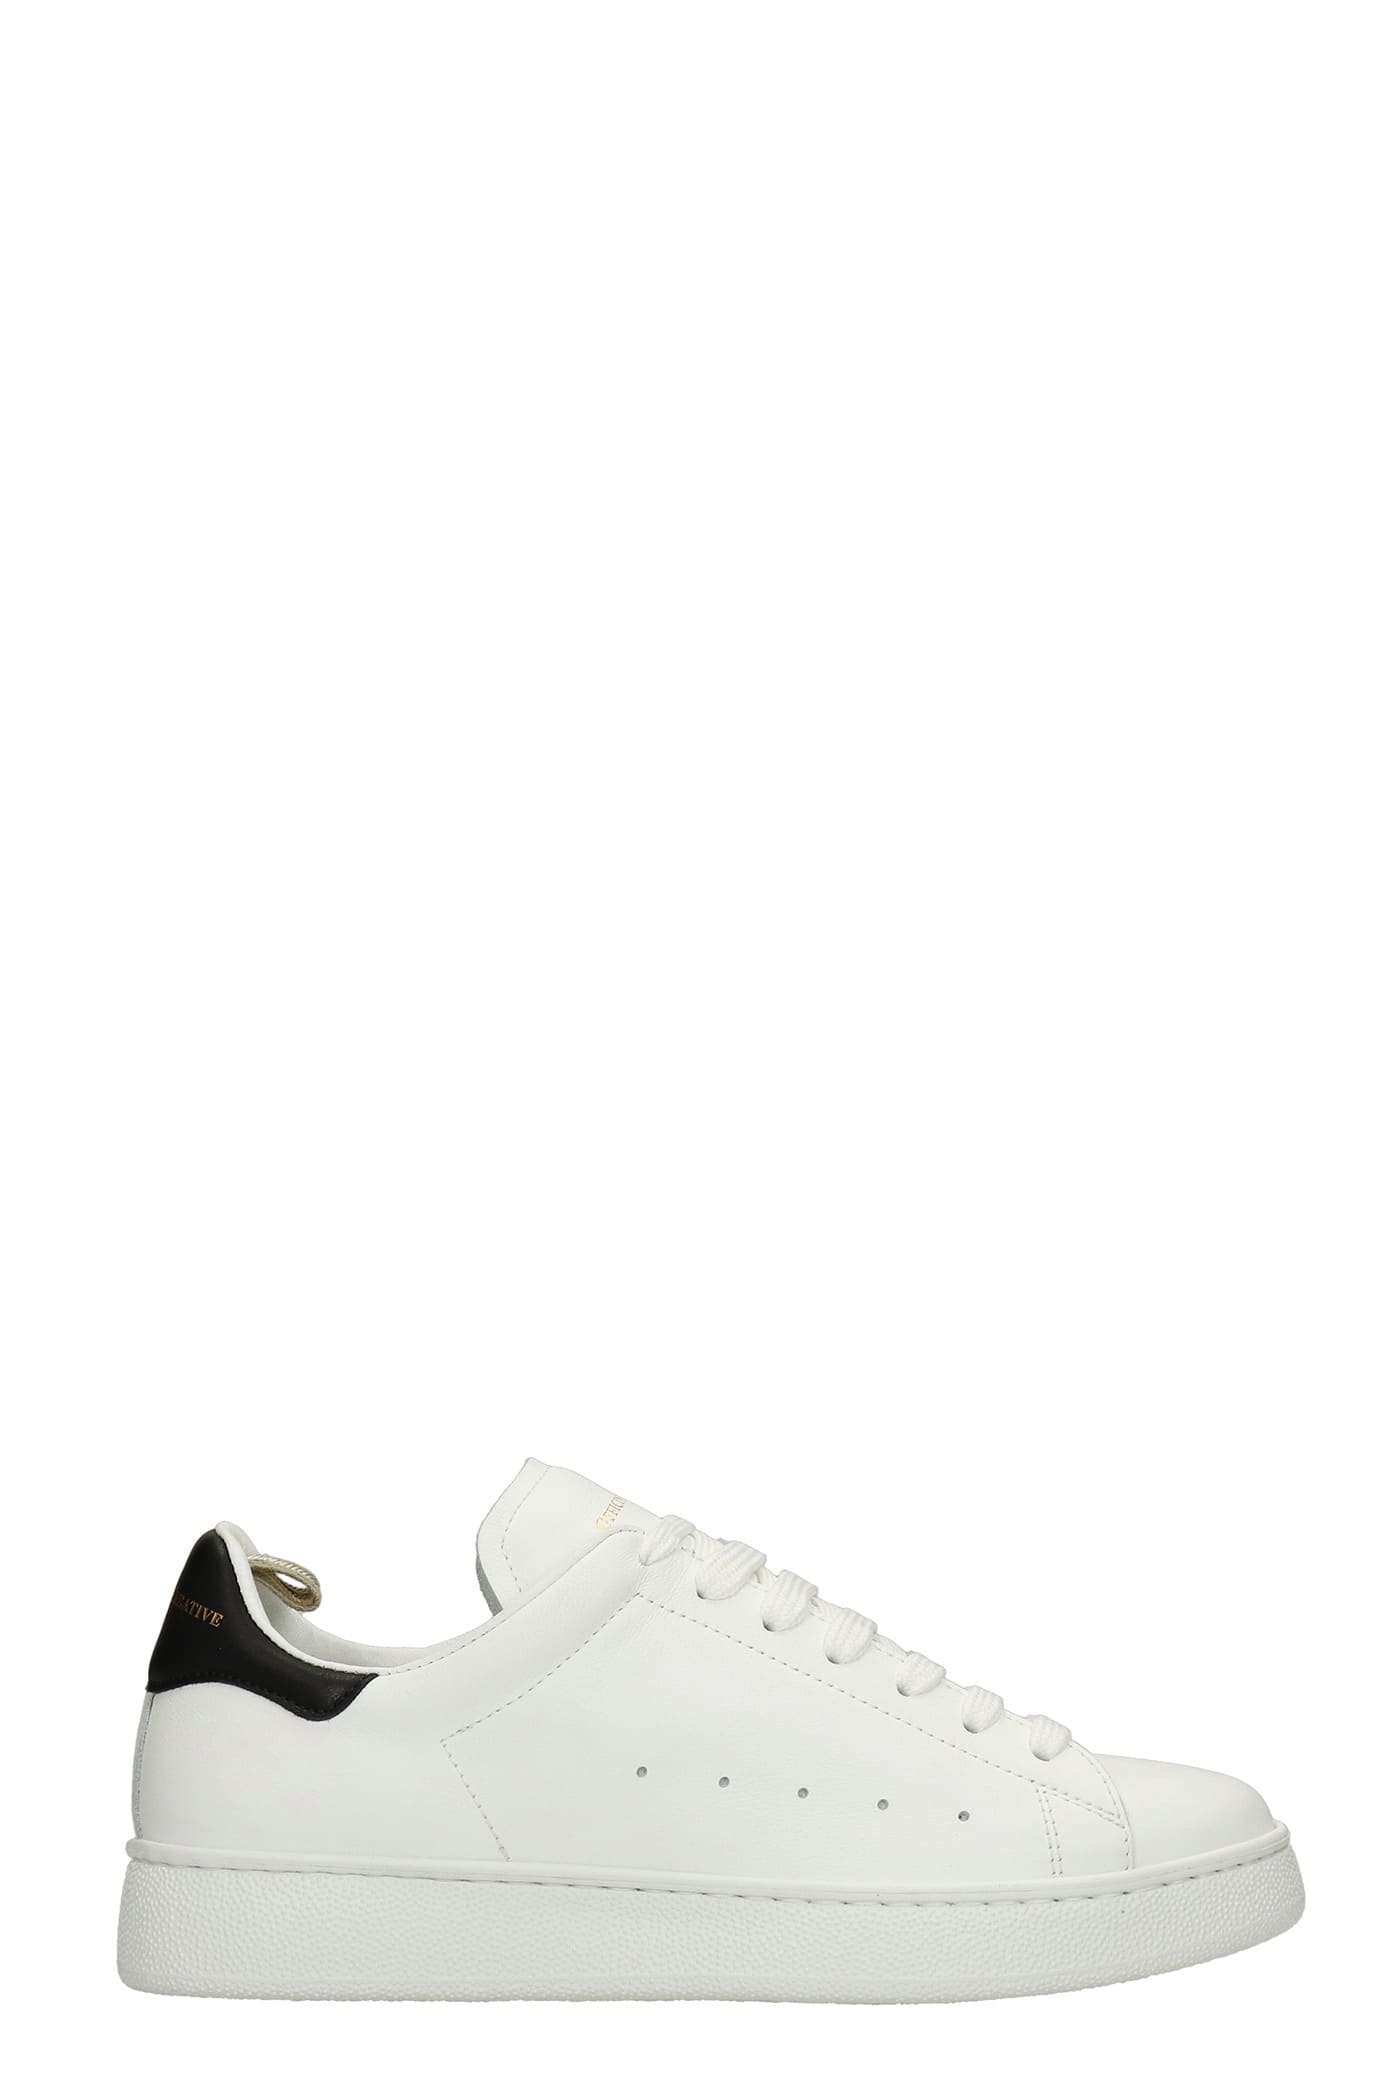 Officine Creative Mower 100 Sneakers In White Leather